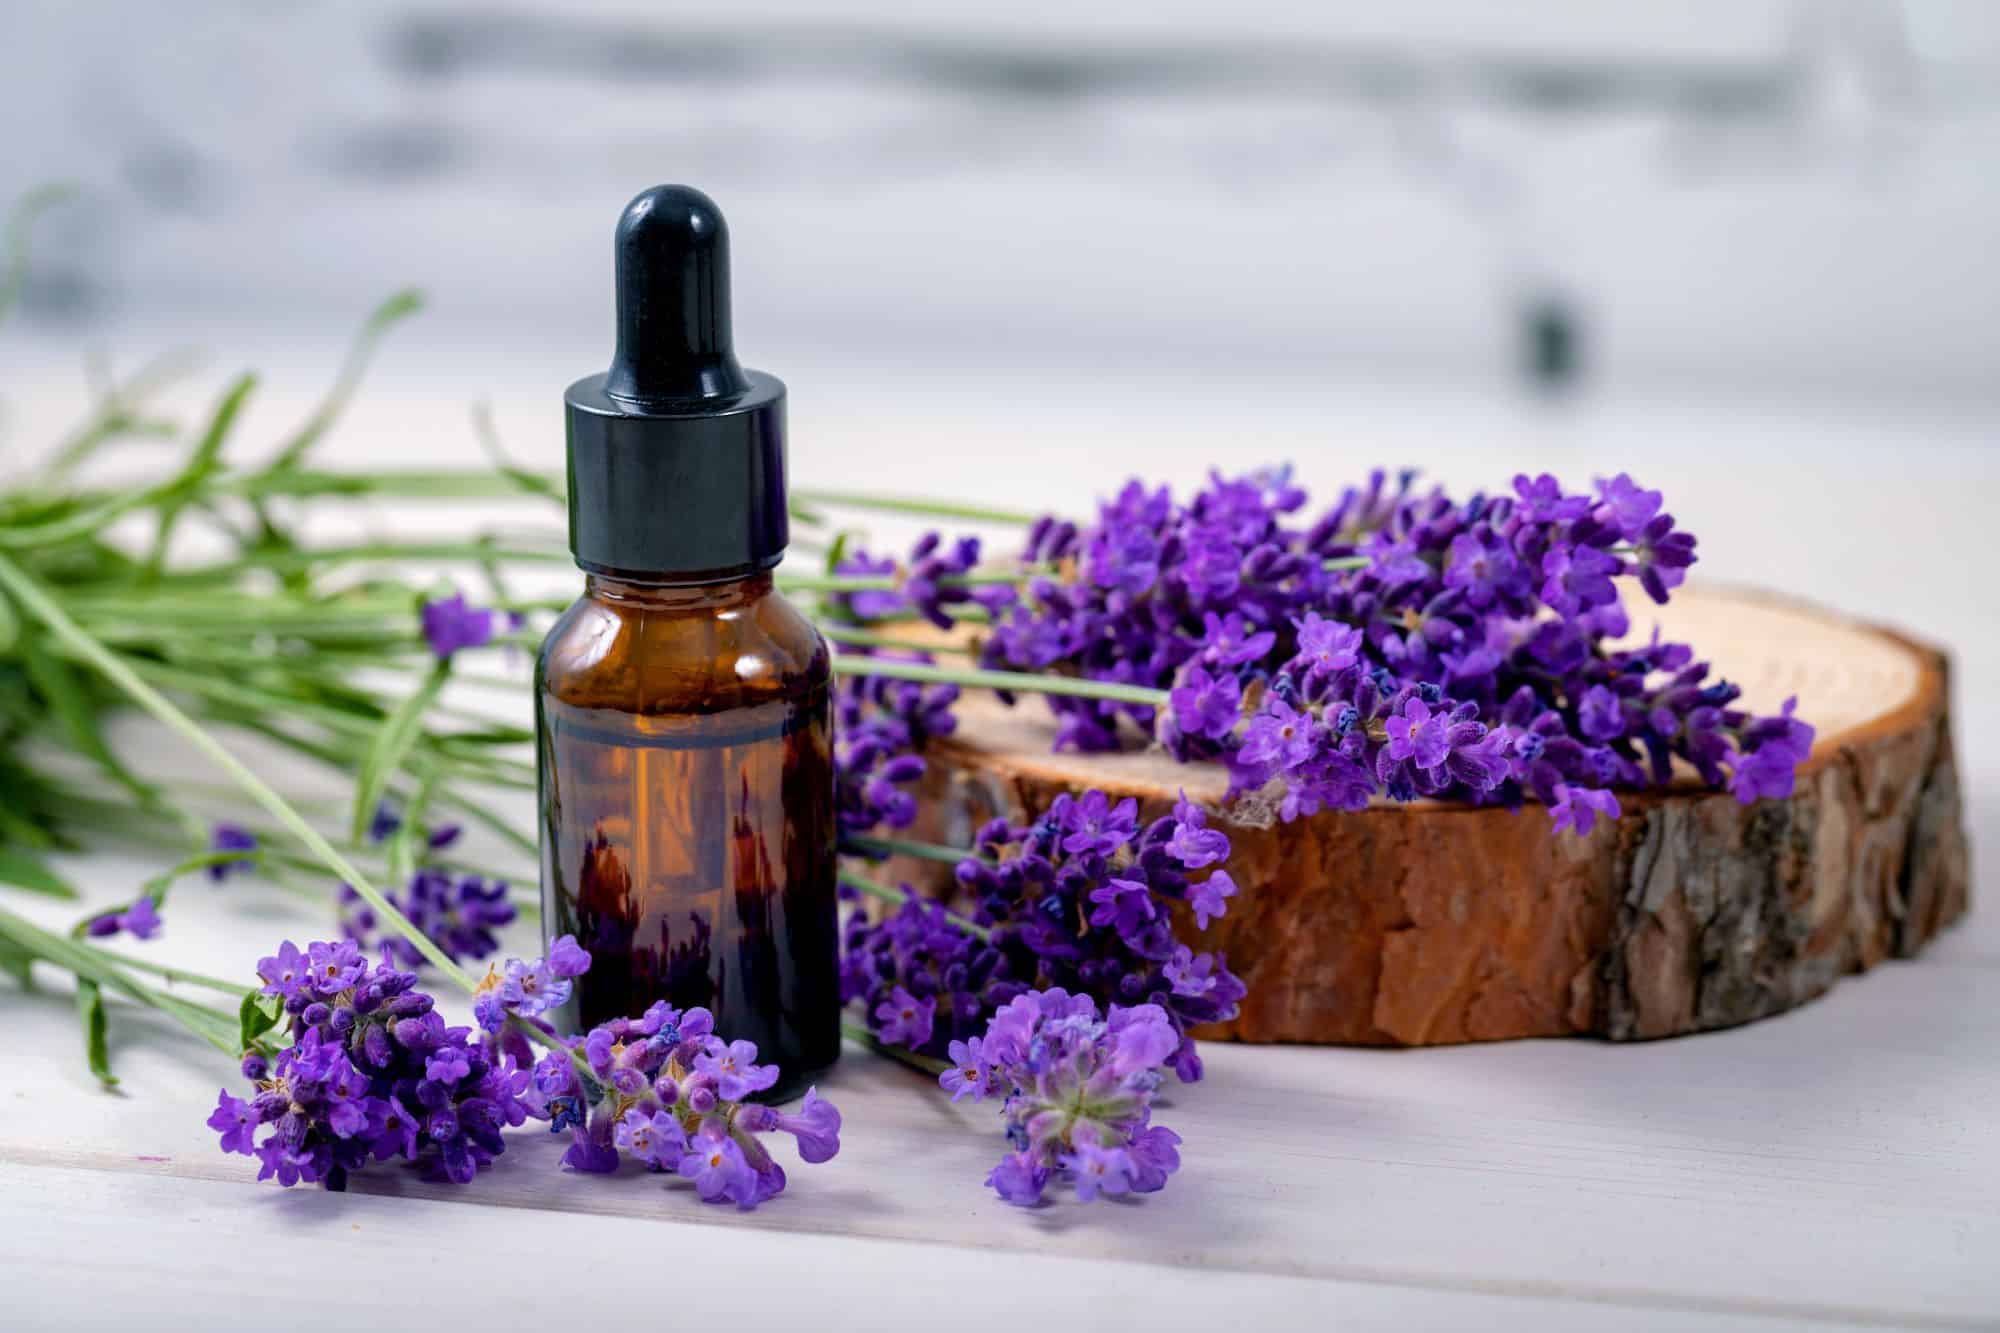 How to Tell Real Lavender Oil From Fake